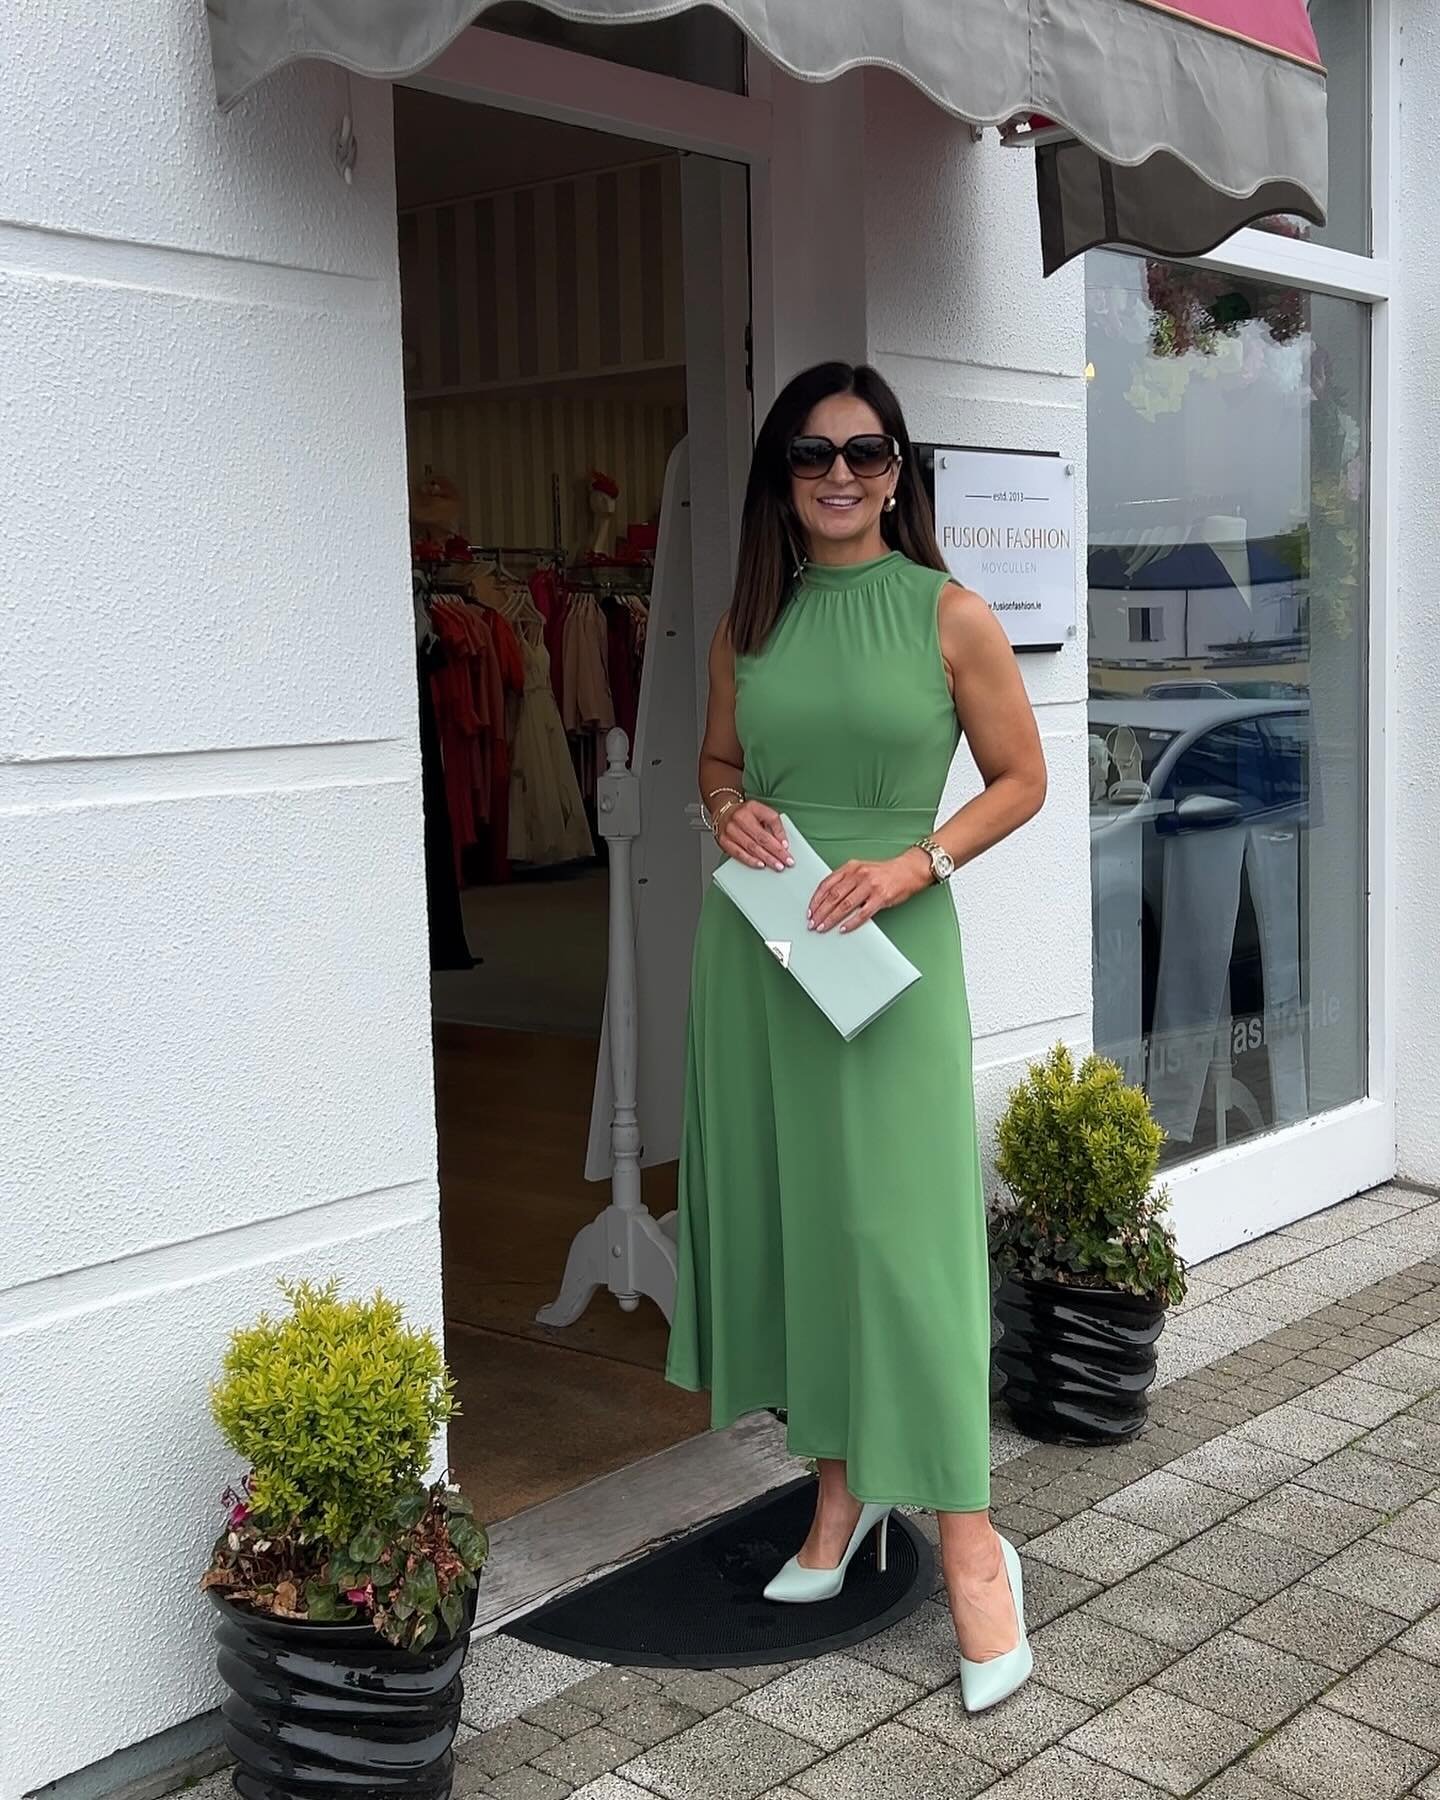 💚🥂💫 New&hellip;.Stunning green midi dress in the most luxurious fabric. Adore the back detail and that bow. Made for Summer events. 

Ciara Dress &euro;120
Lodi Mint Court &euro;155

Shop the look online now
Fiona x
#newarrivals #summervibes #wedd